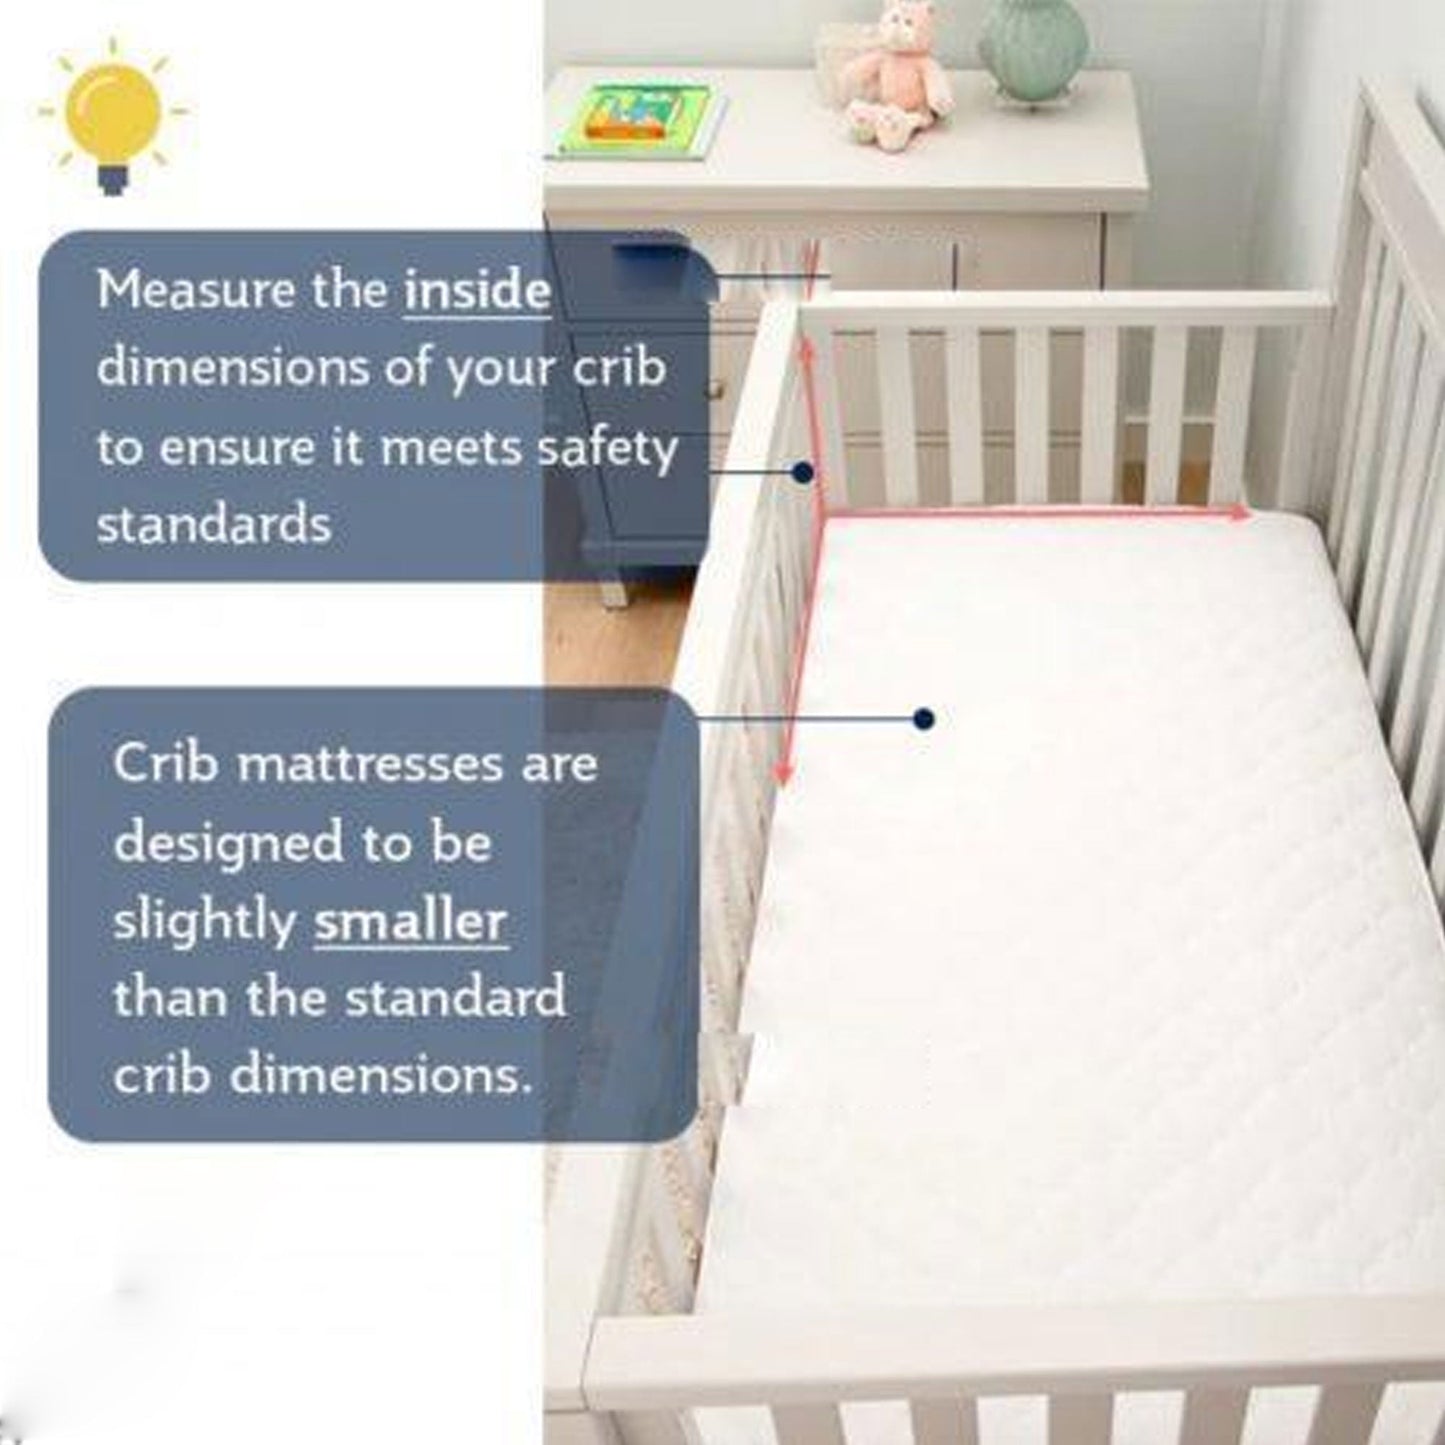 71 X 35 X 4 CM - CRIB Breathable Quilted Cot Baby Mattress - TheComfortshop.co.ukNursery Bedding0721718956563thecomfortshopTheComfortshop.co.ukCrib 71 x 3571 X 35 X 4 CM - CRIB Breathable Quilted Cot Baby Mattress - TheComfortshop.co.uk